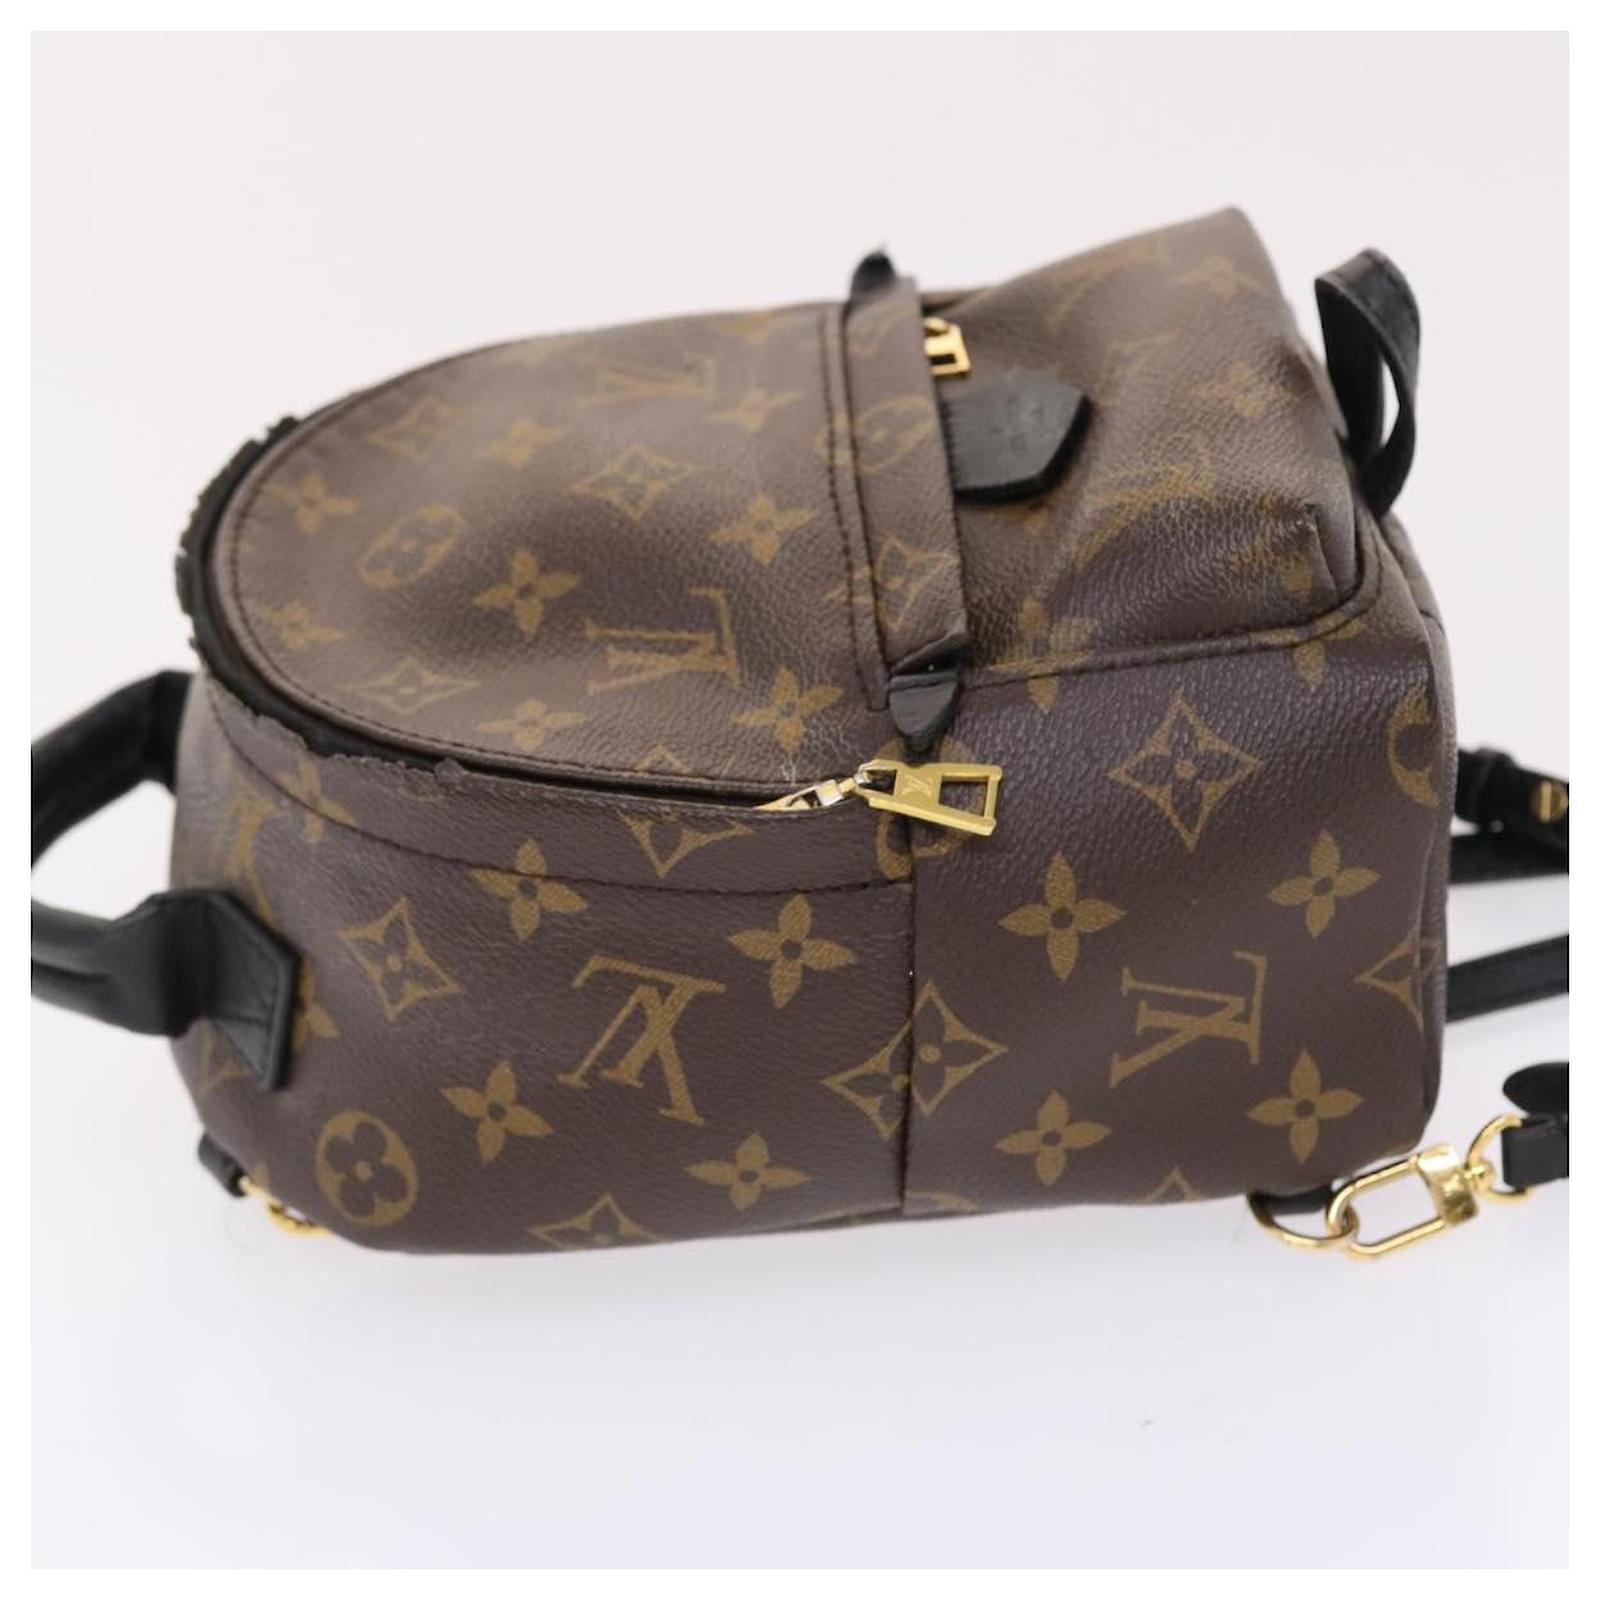 Backpack Organizer For Louis Vuitton Palm Springs Mini Backpack